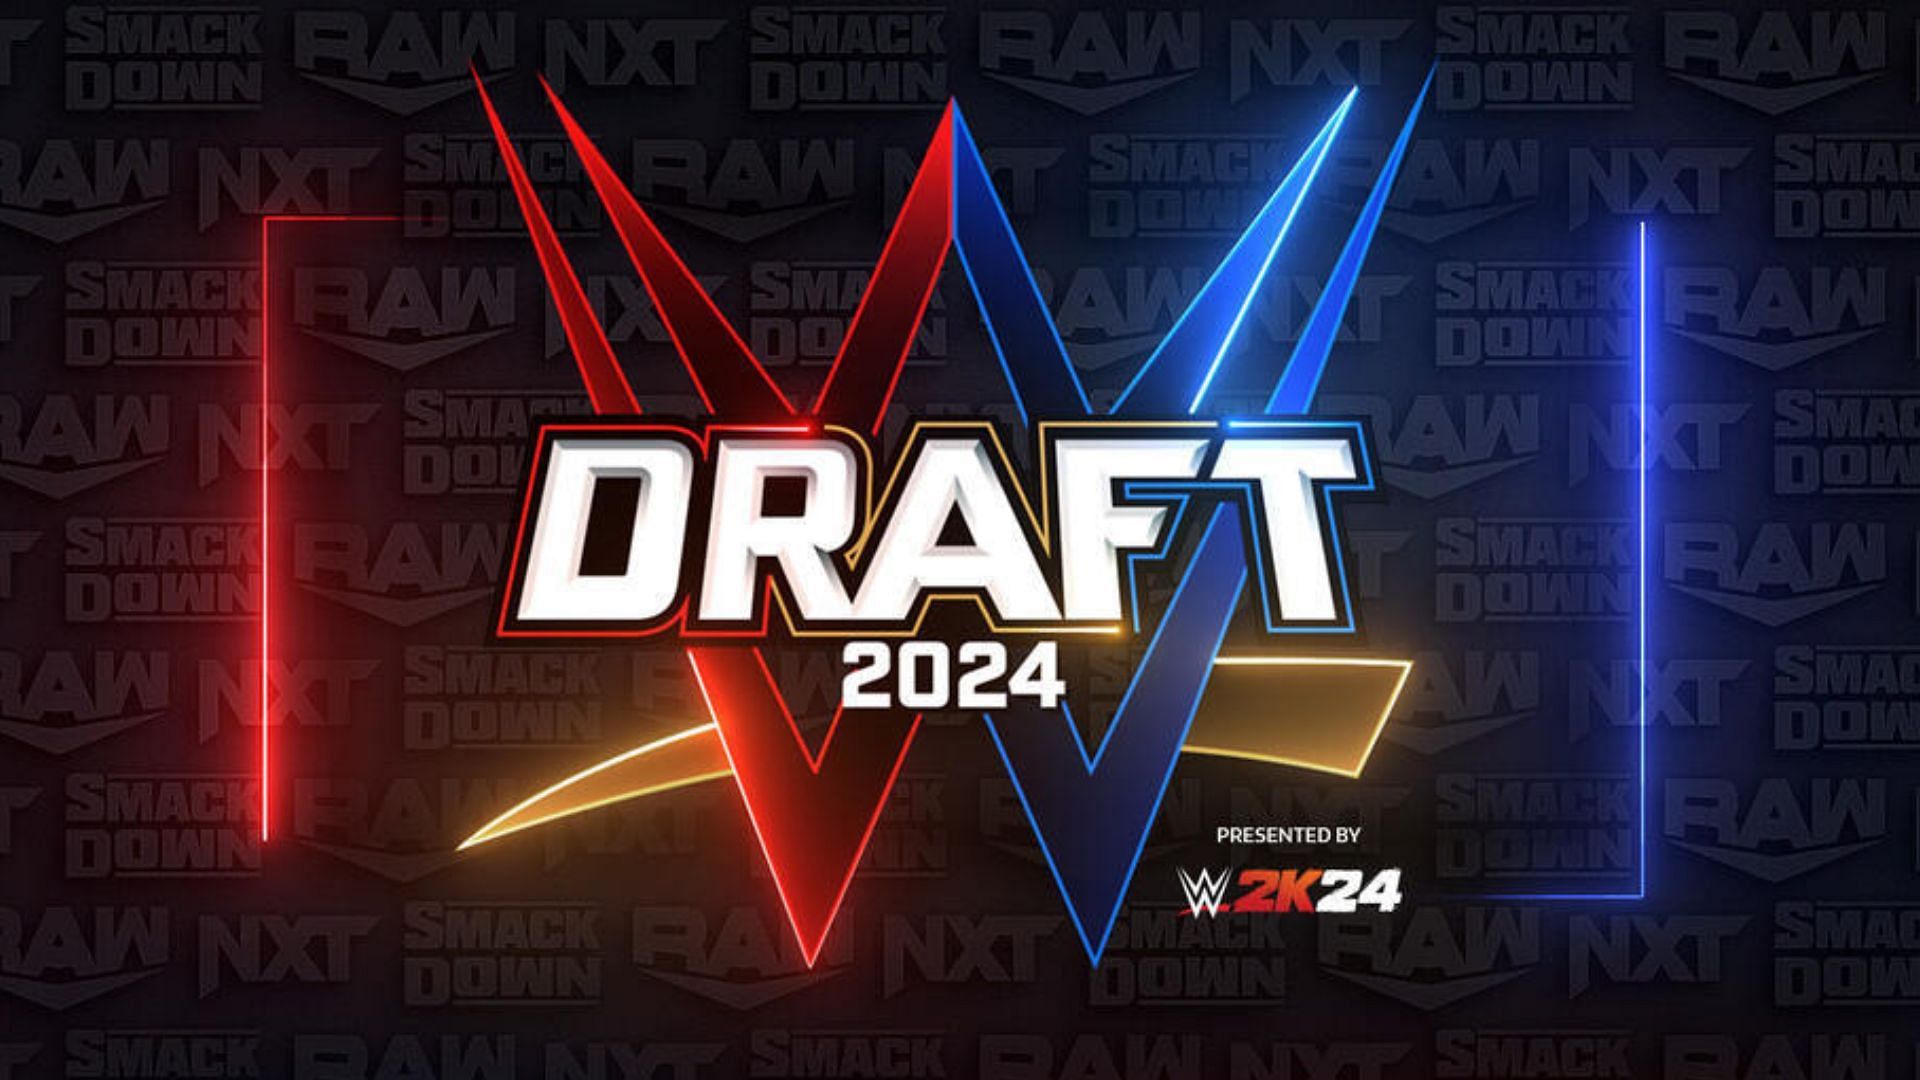 WWE Draft will be in full effect after Backlash 2024!